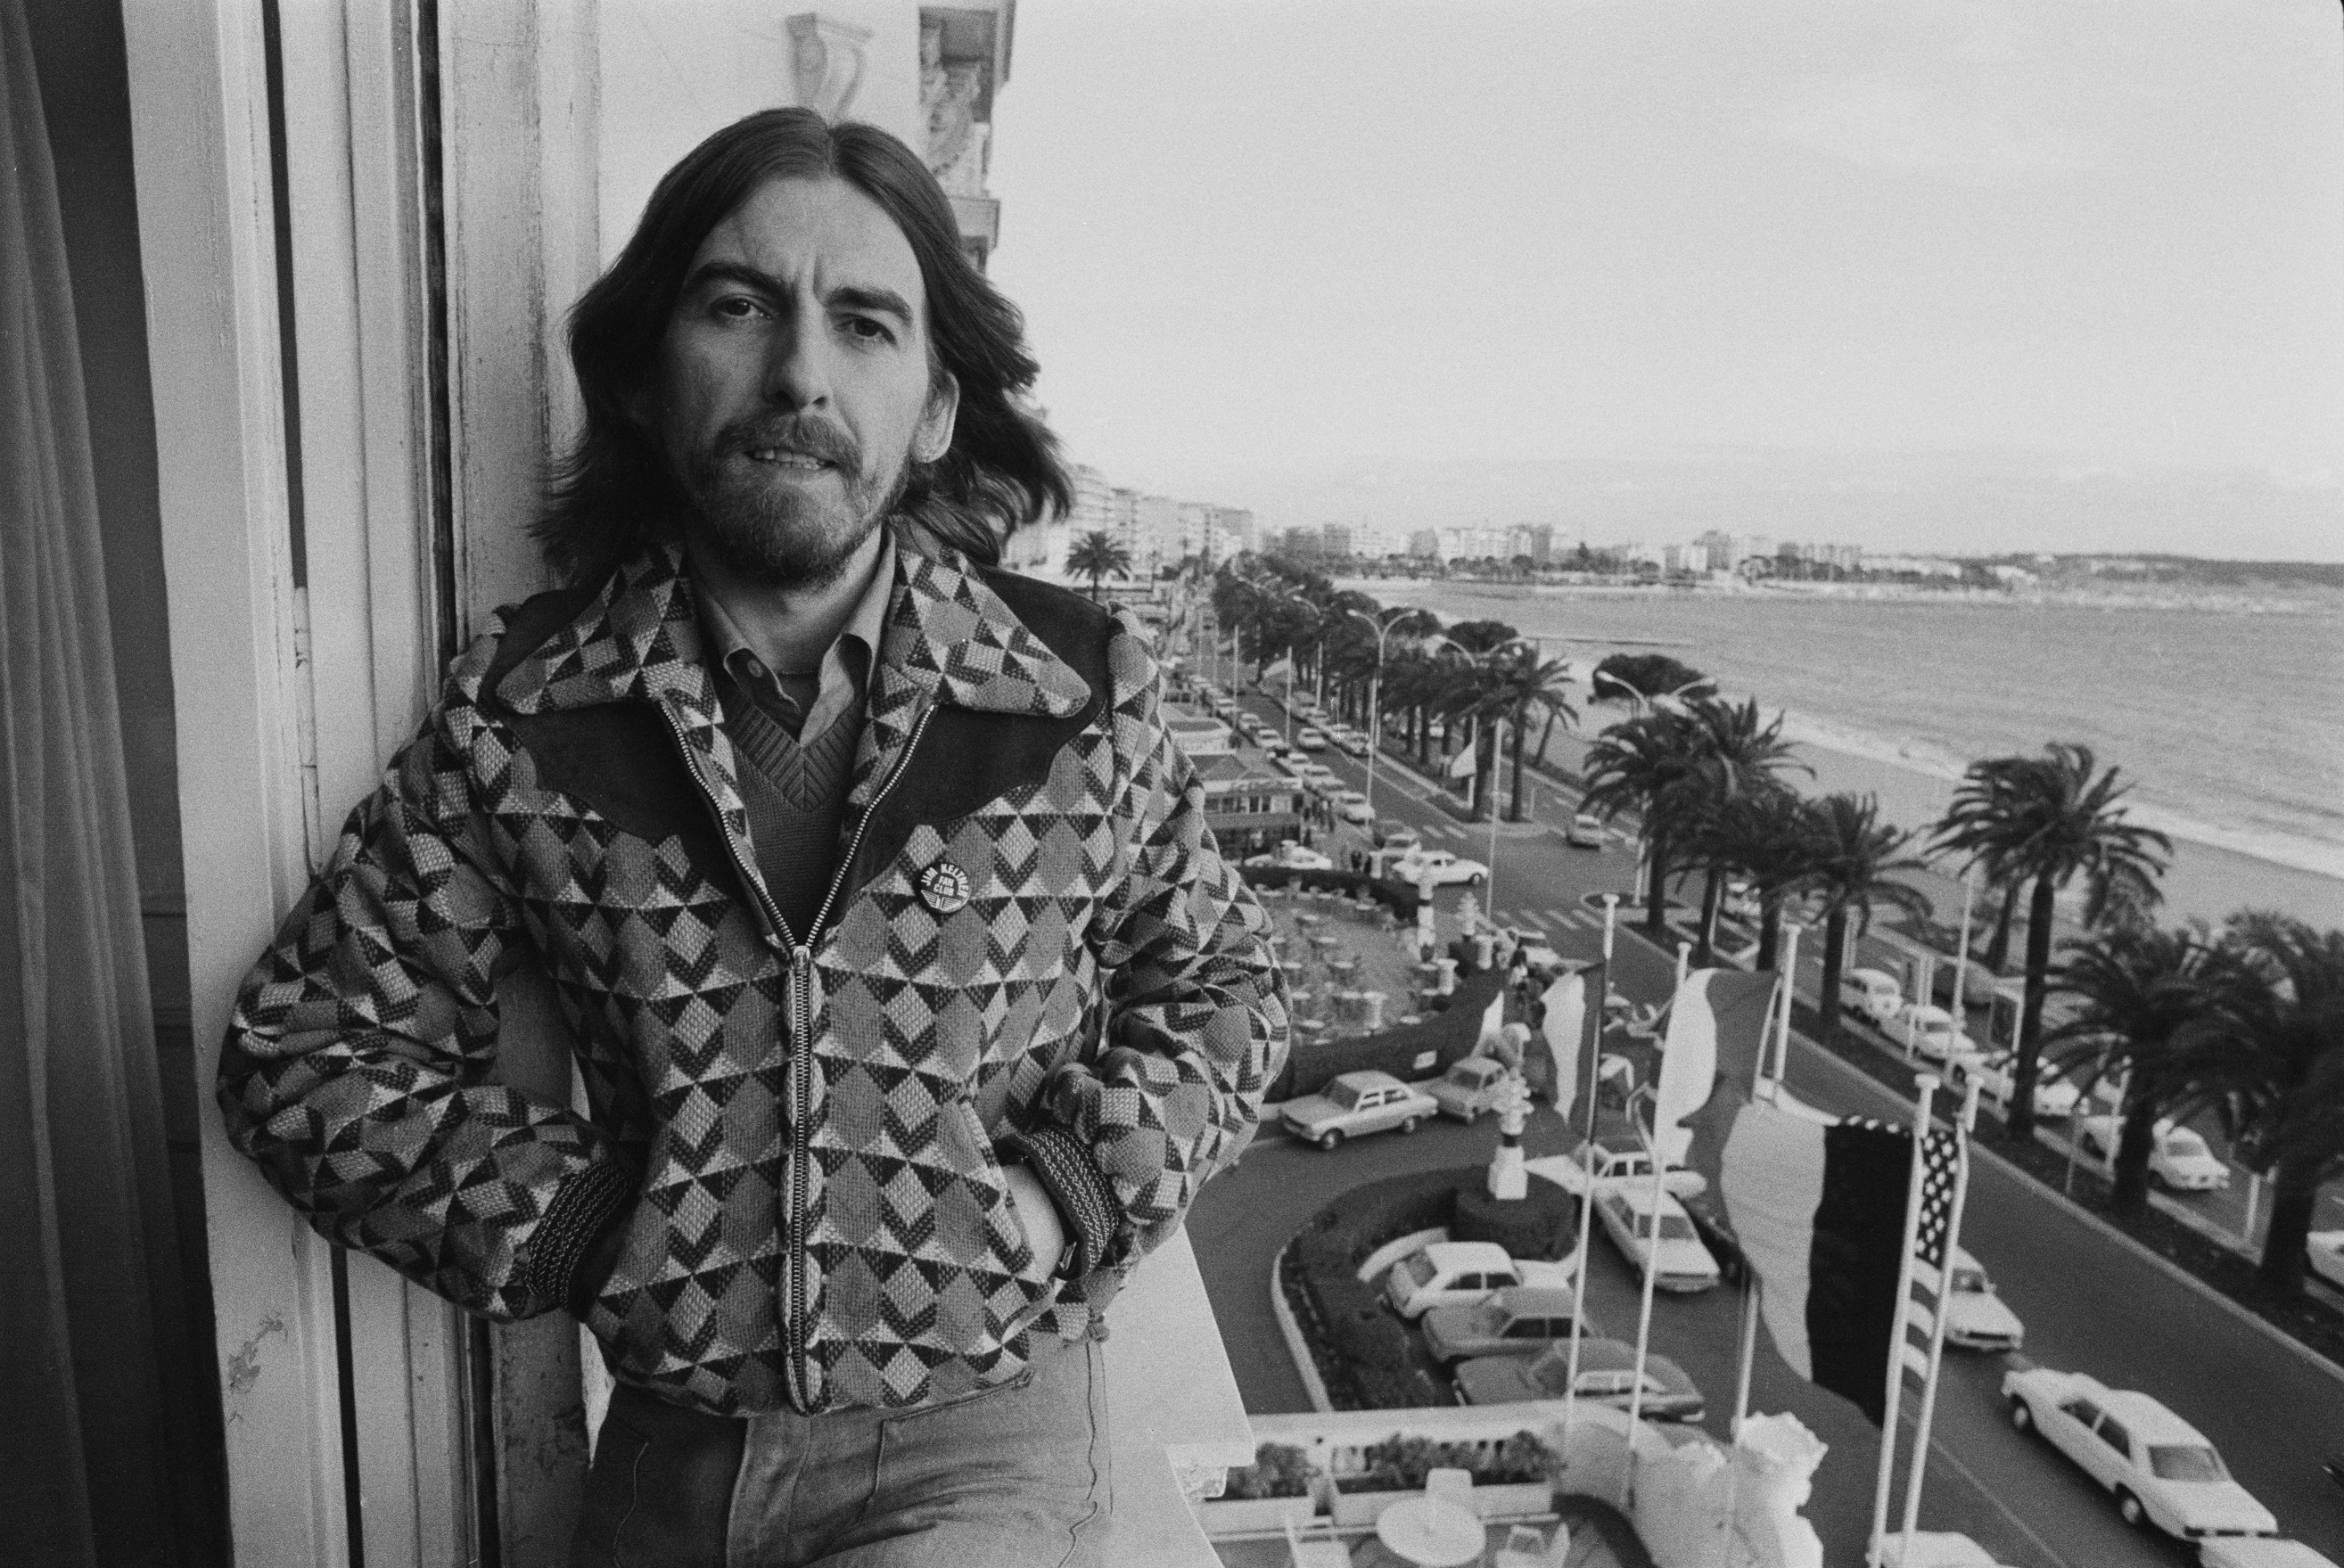 The Beatles' George Harrison wearing a sweater